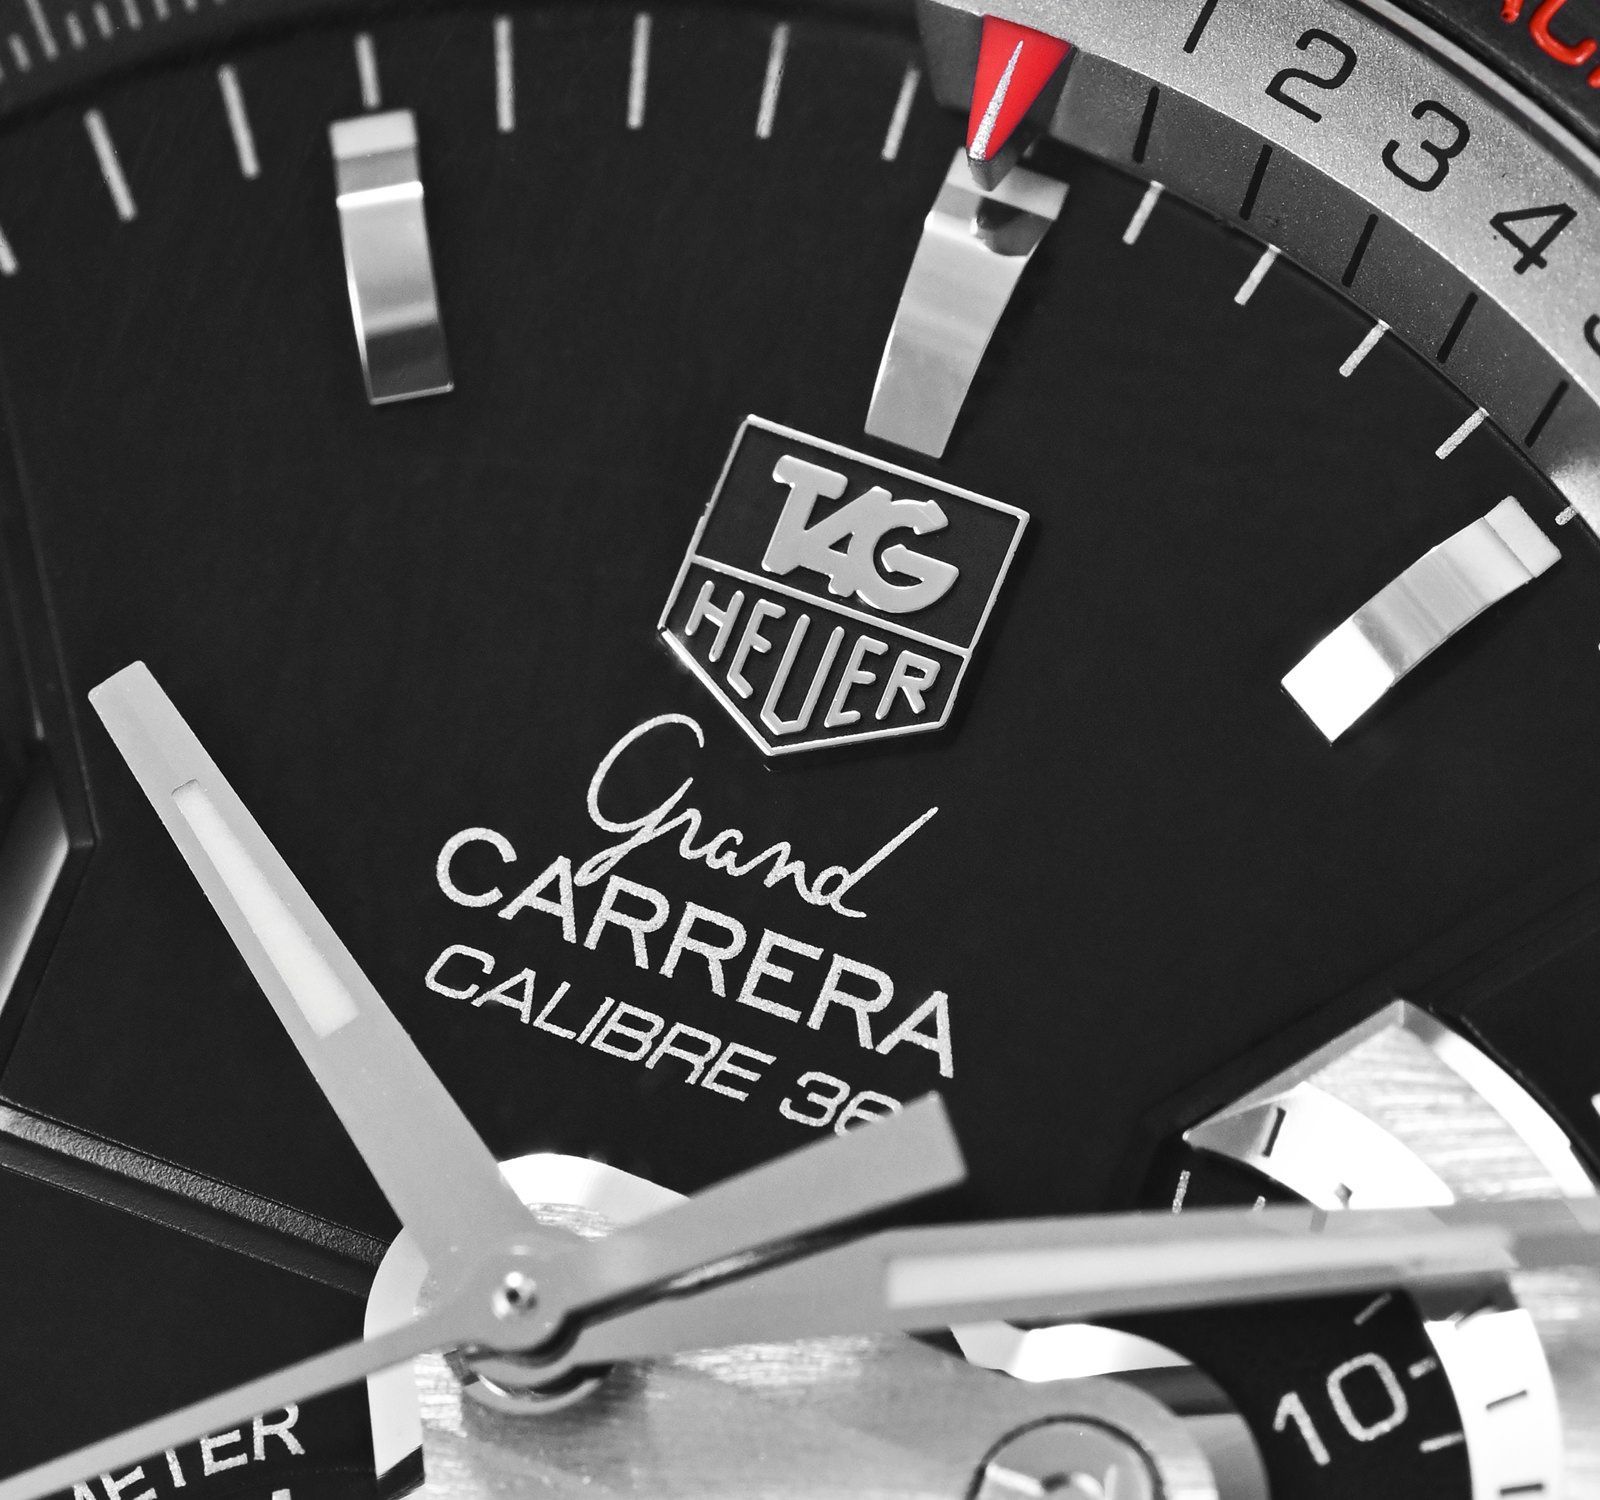 Pre-Owned TAG Heuer Grand Carrera Price